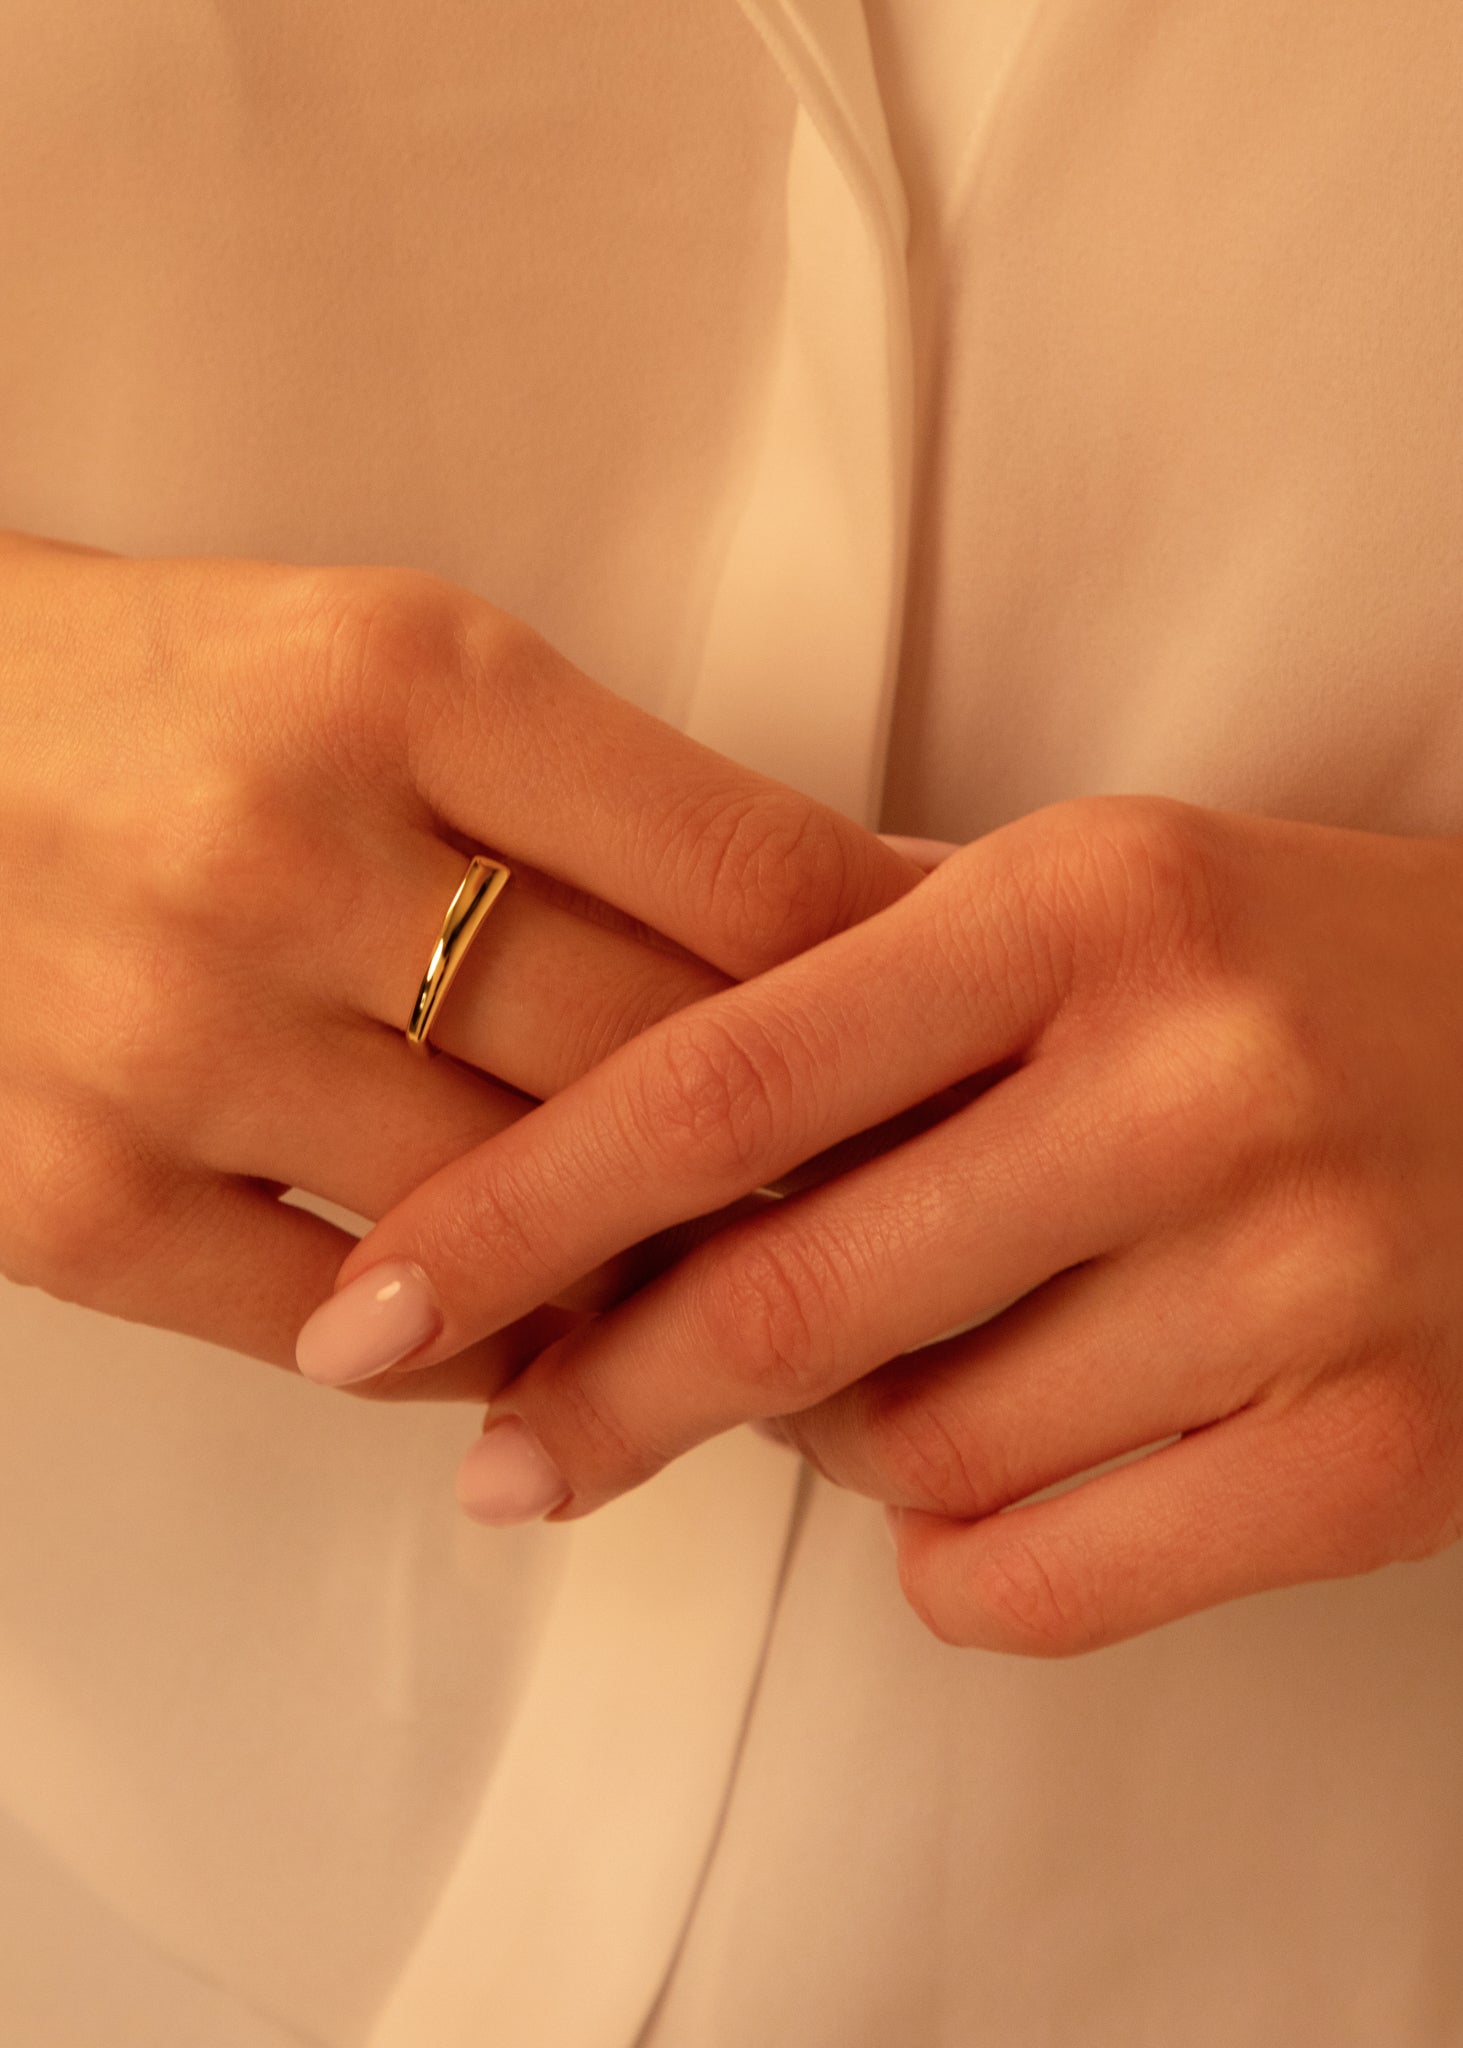 Gold core ring